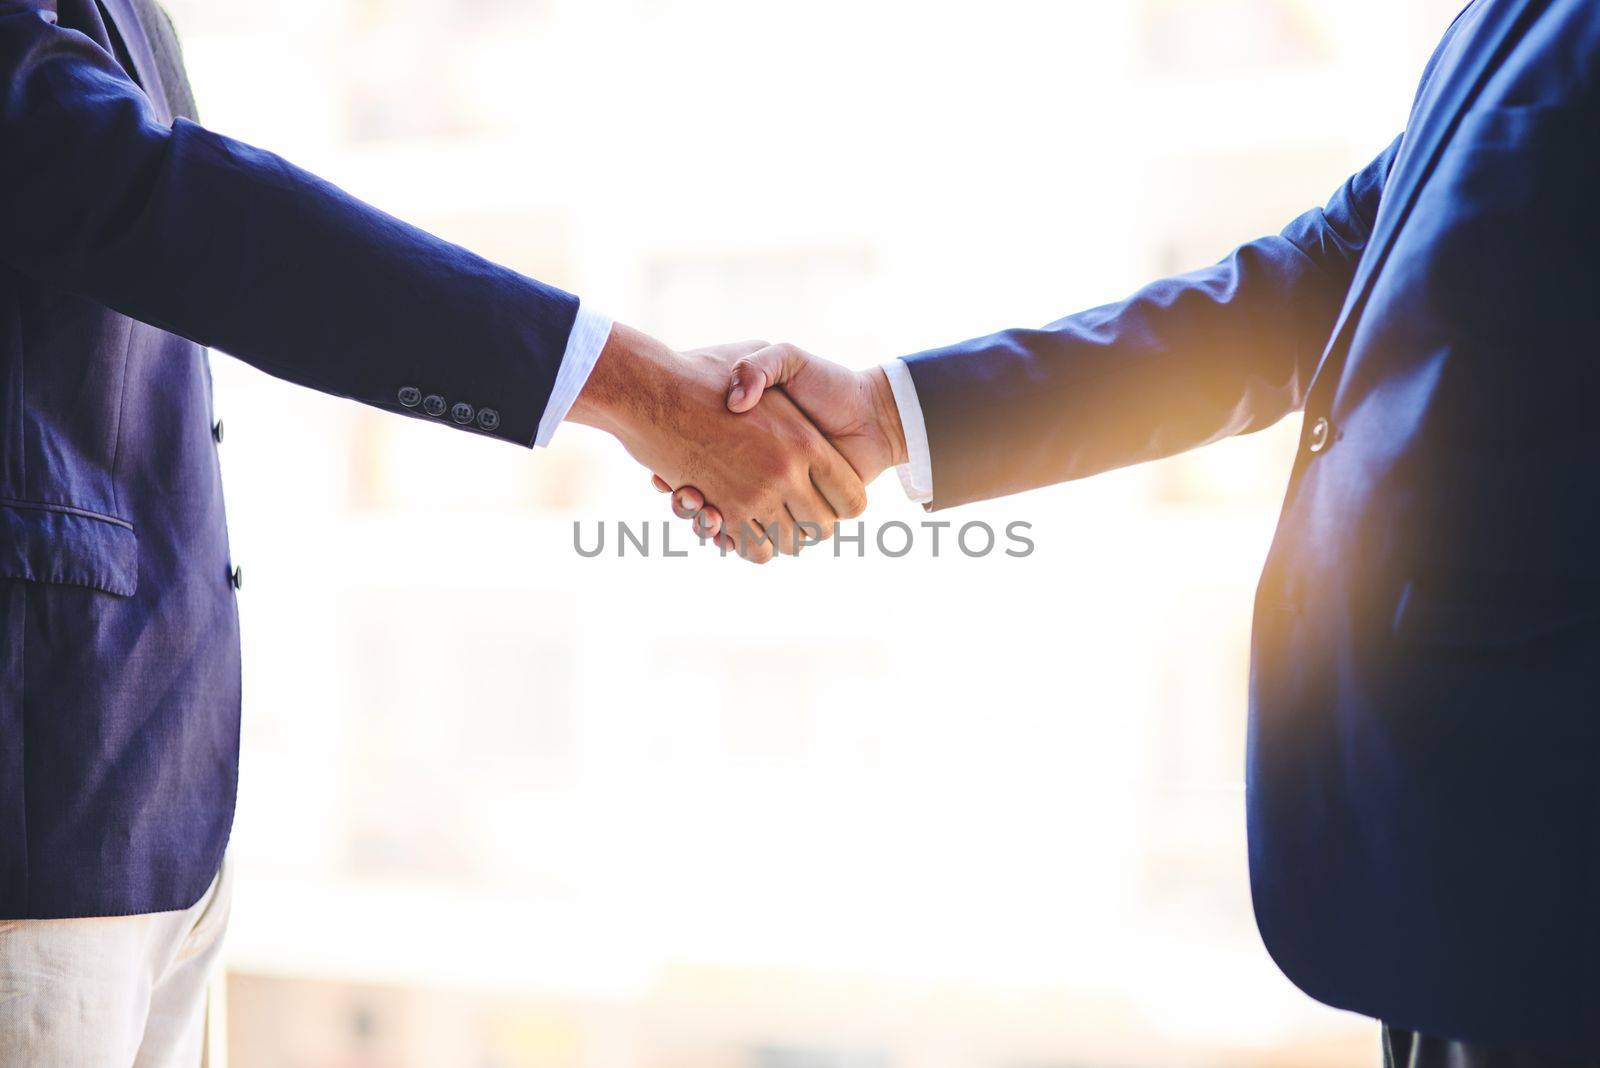 Forming strengthened business relationships. Closeup shot of two unidentifiable businesspeople shaking hands in an office